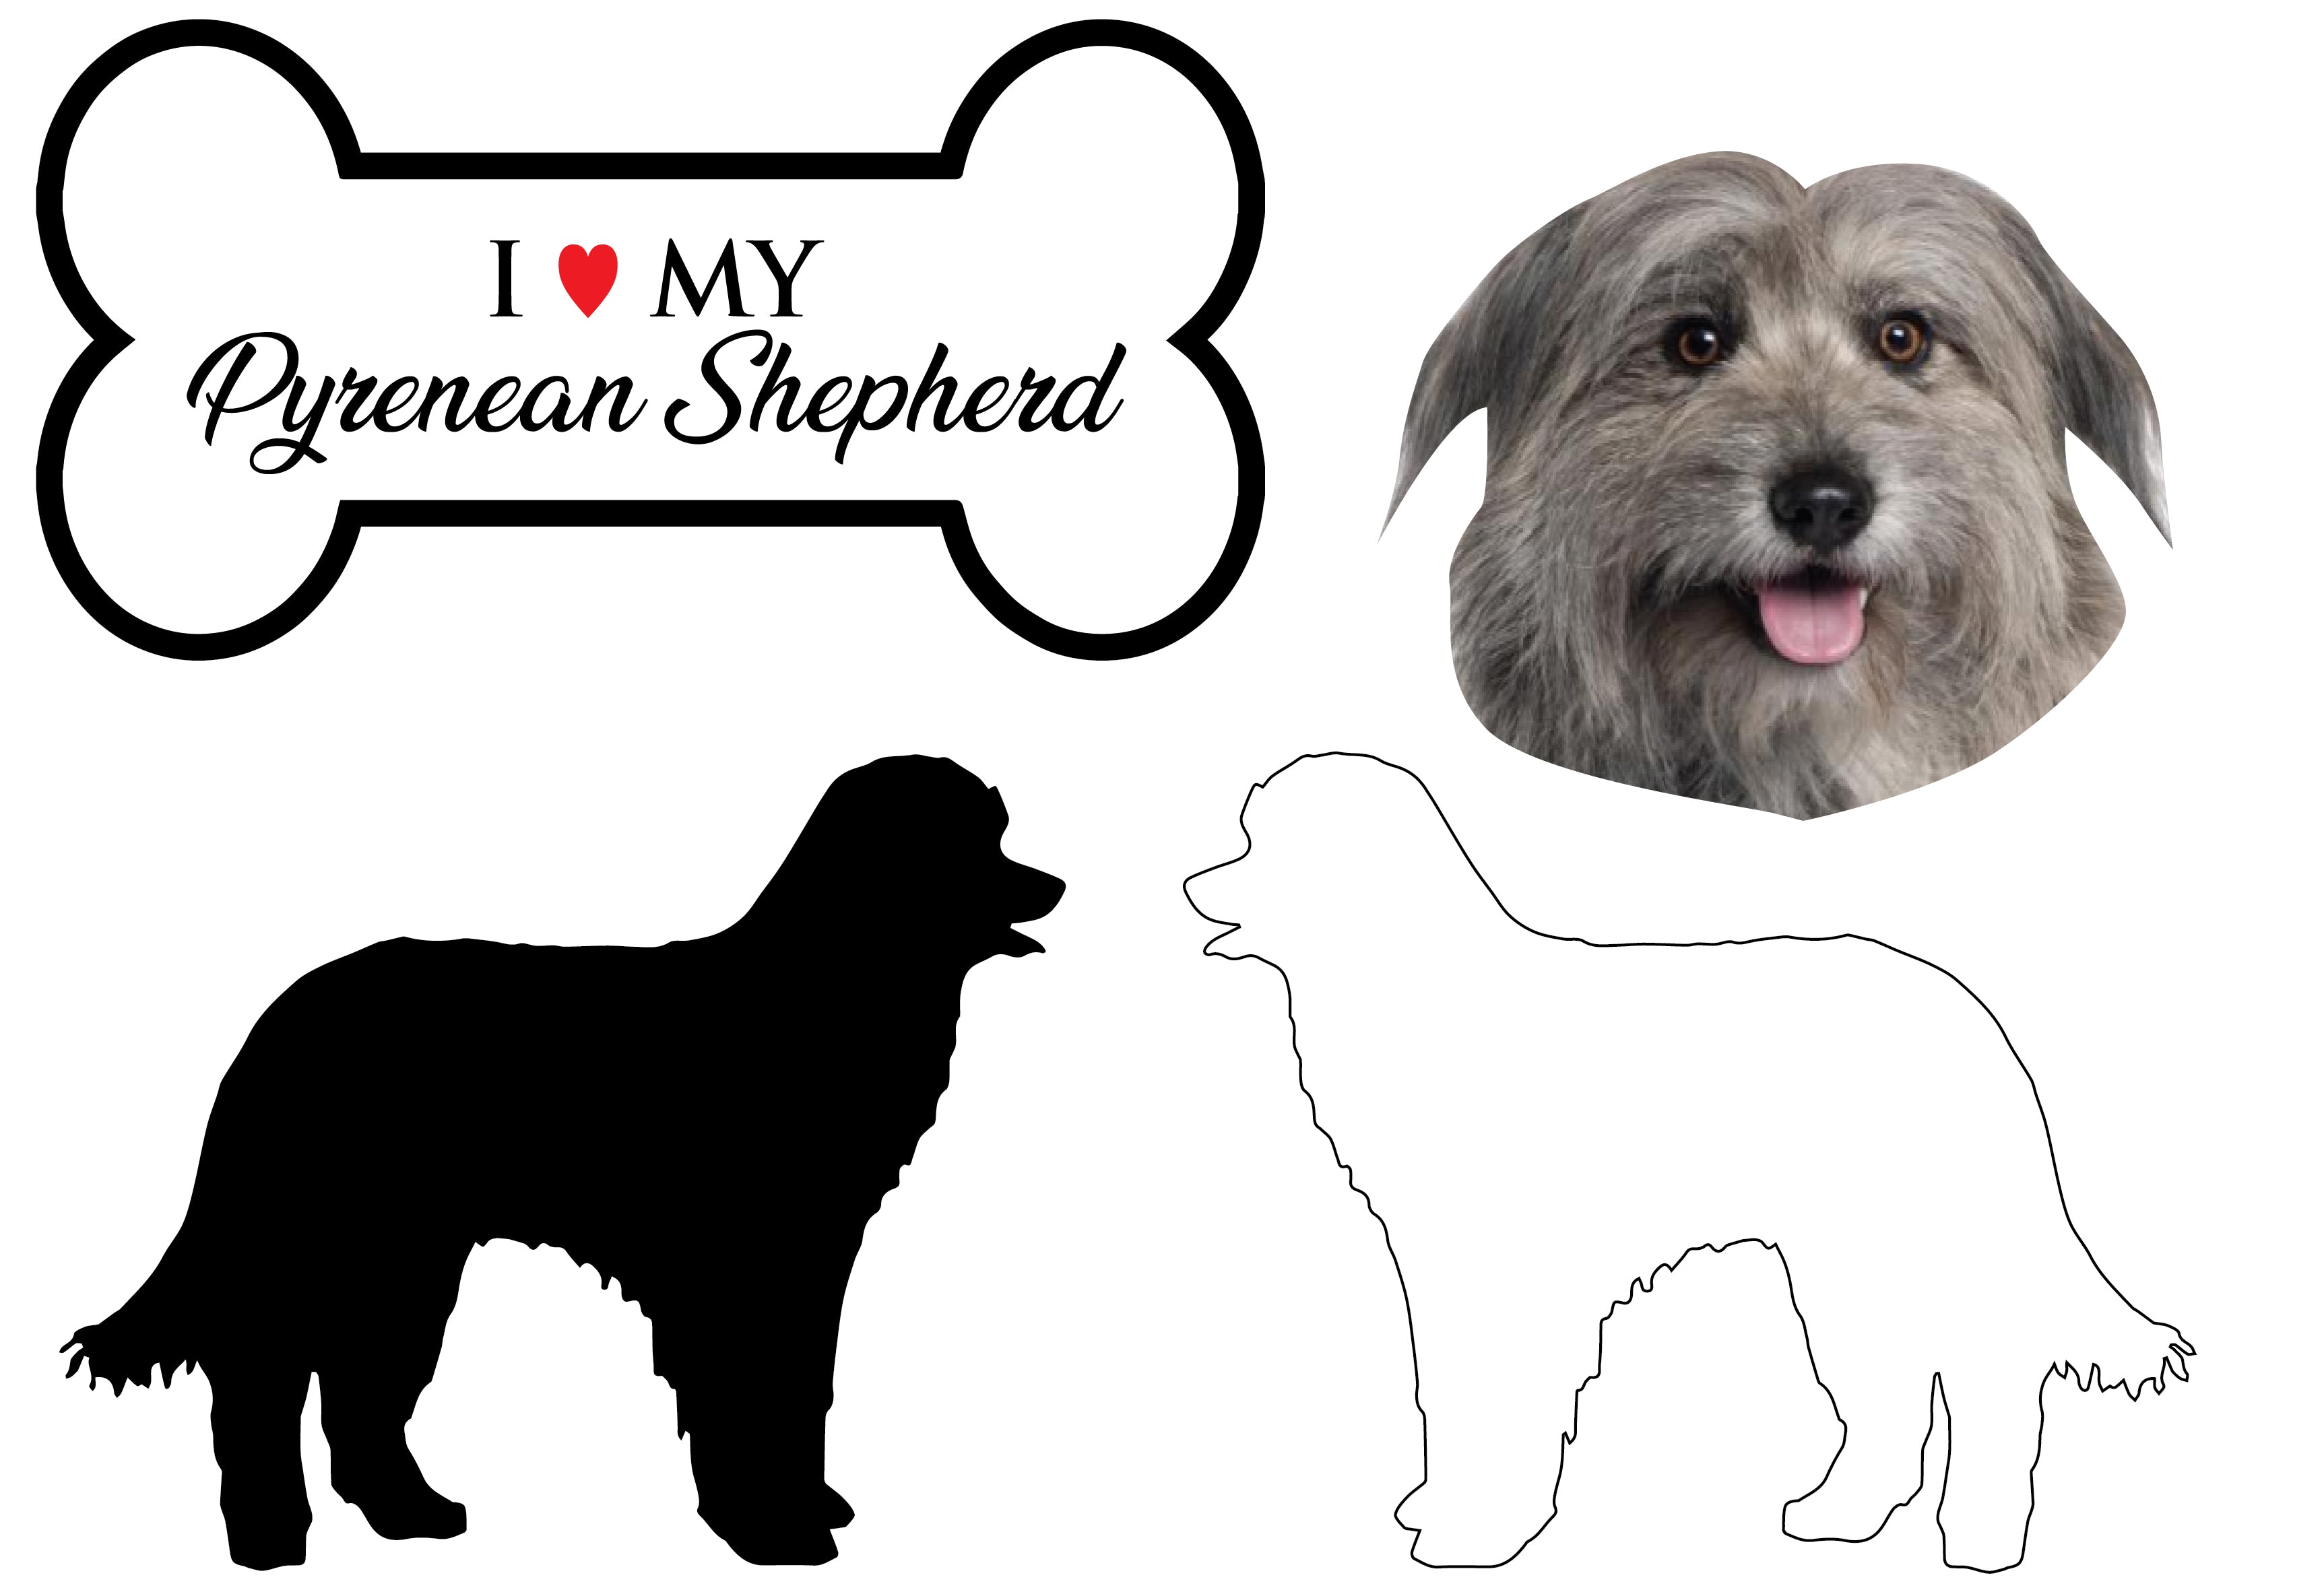 Pyrenean Shepherd - Dog Breed Decals (Set of 16) - Sizes in Description